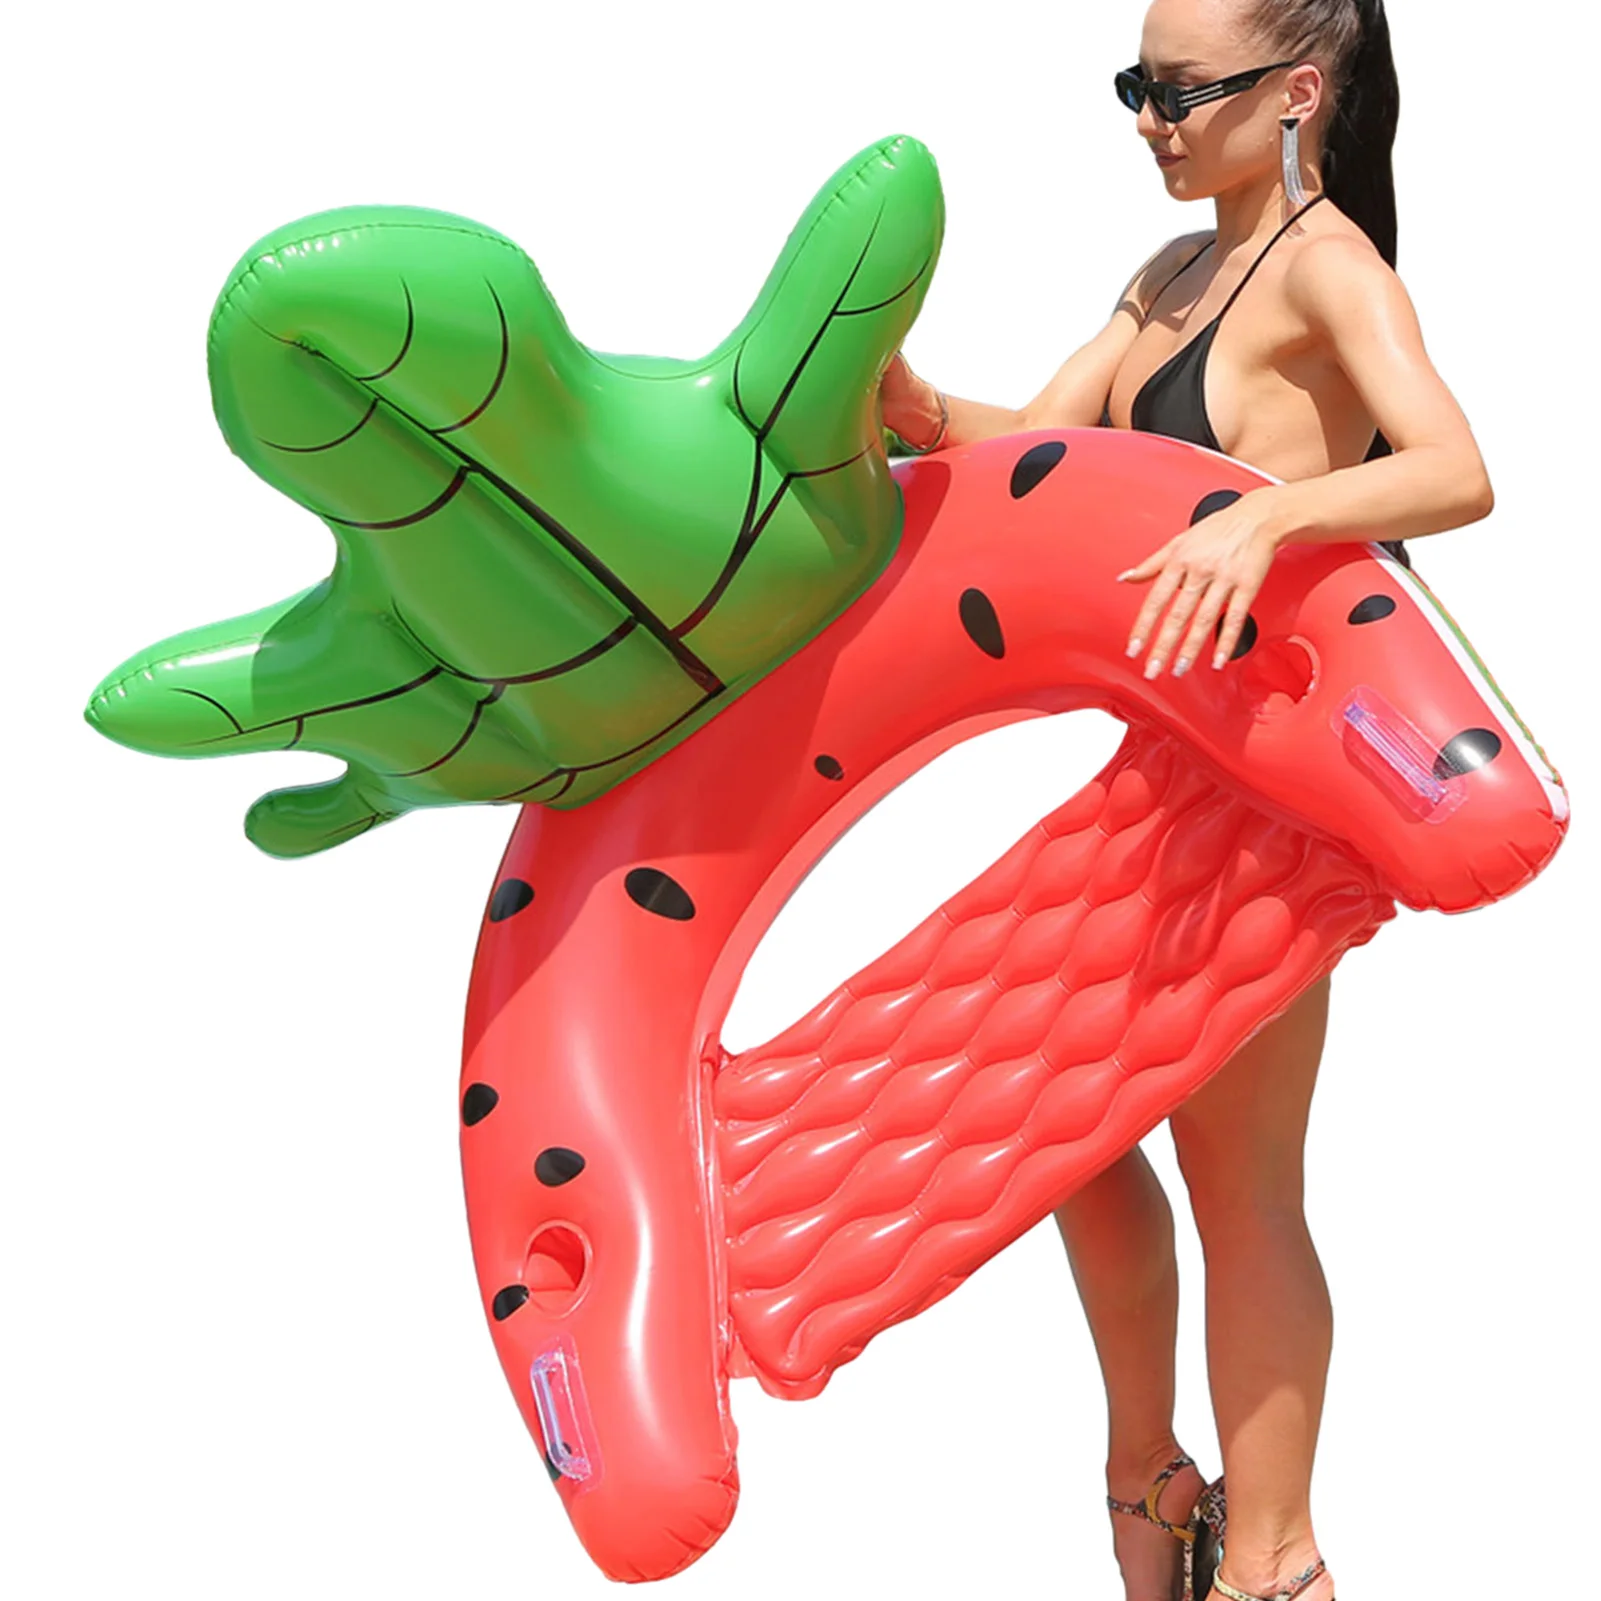 

Giant Iatable Pineapple Pool Float Pool Lounger With Backrest Fruit Pool Float Adult Swimming Pool Floating Row For Beach Fun